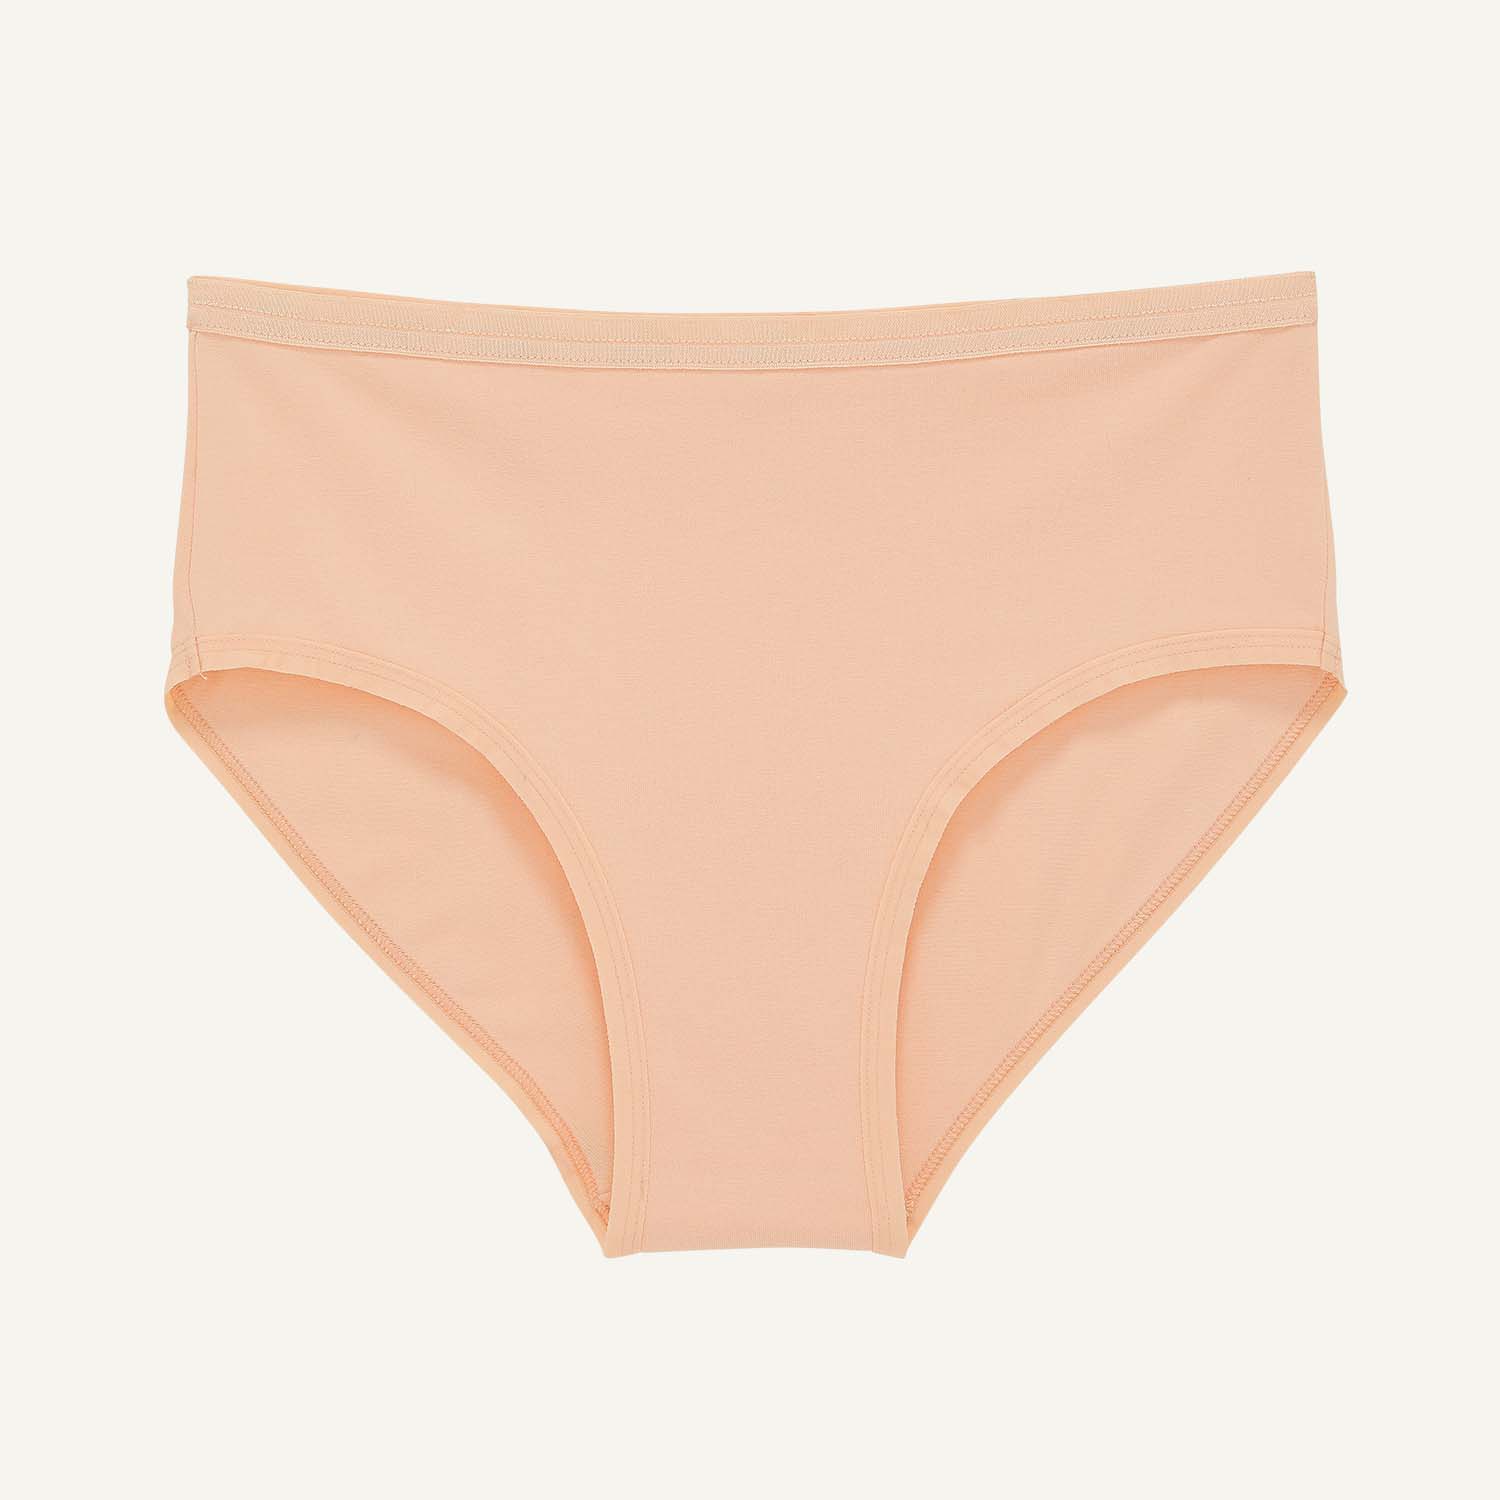 Subset/ Knickey pinkish colored women's briefs.